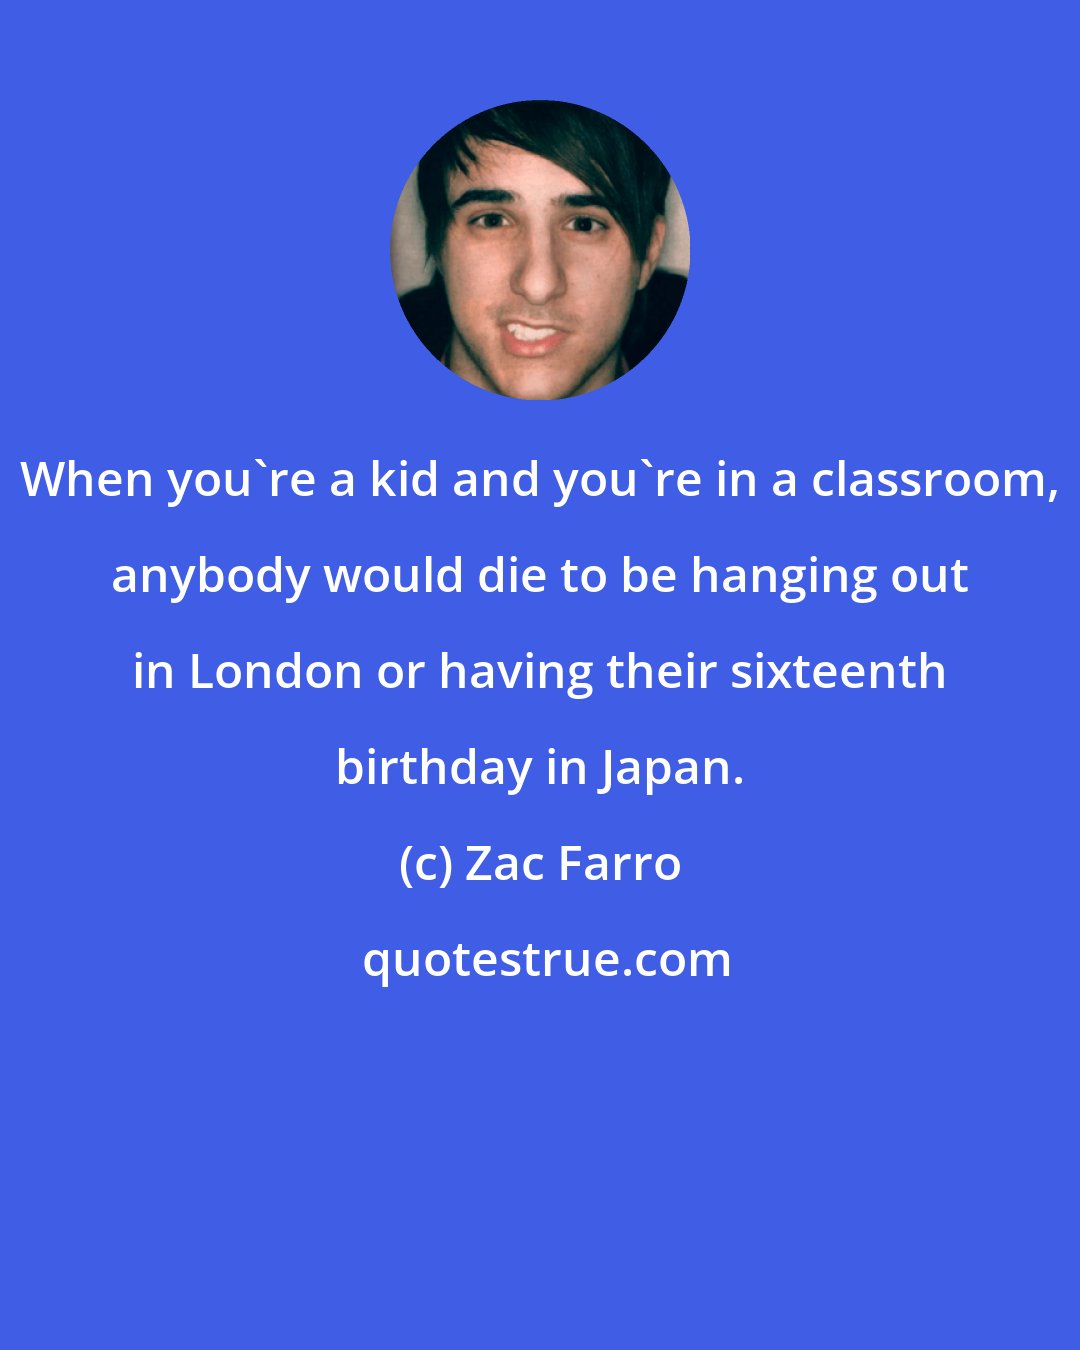 Zac Farro: When you're a kid and you're in a classroom, anybody would die to be hanging out in London or having their sixteenth birthday in Japan.